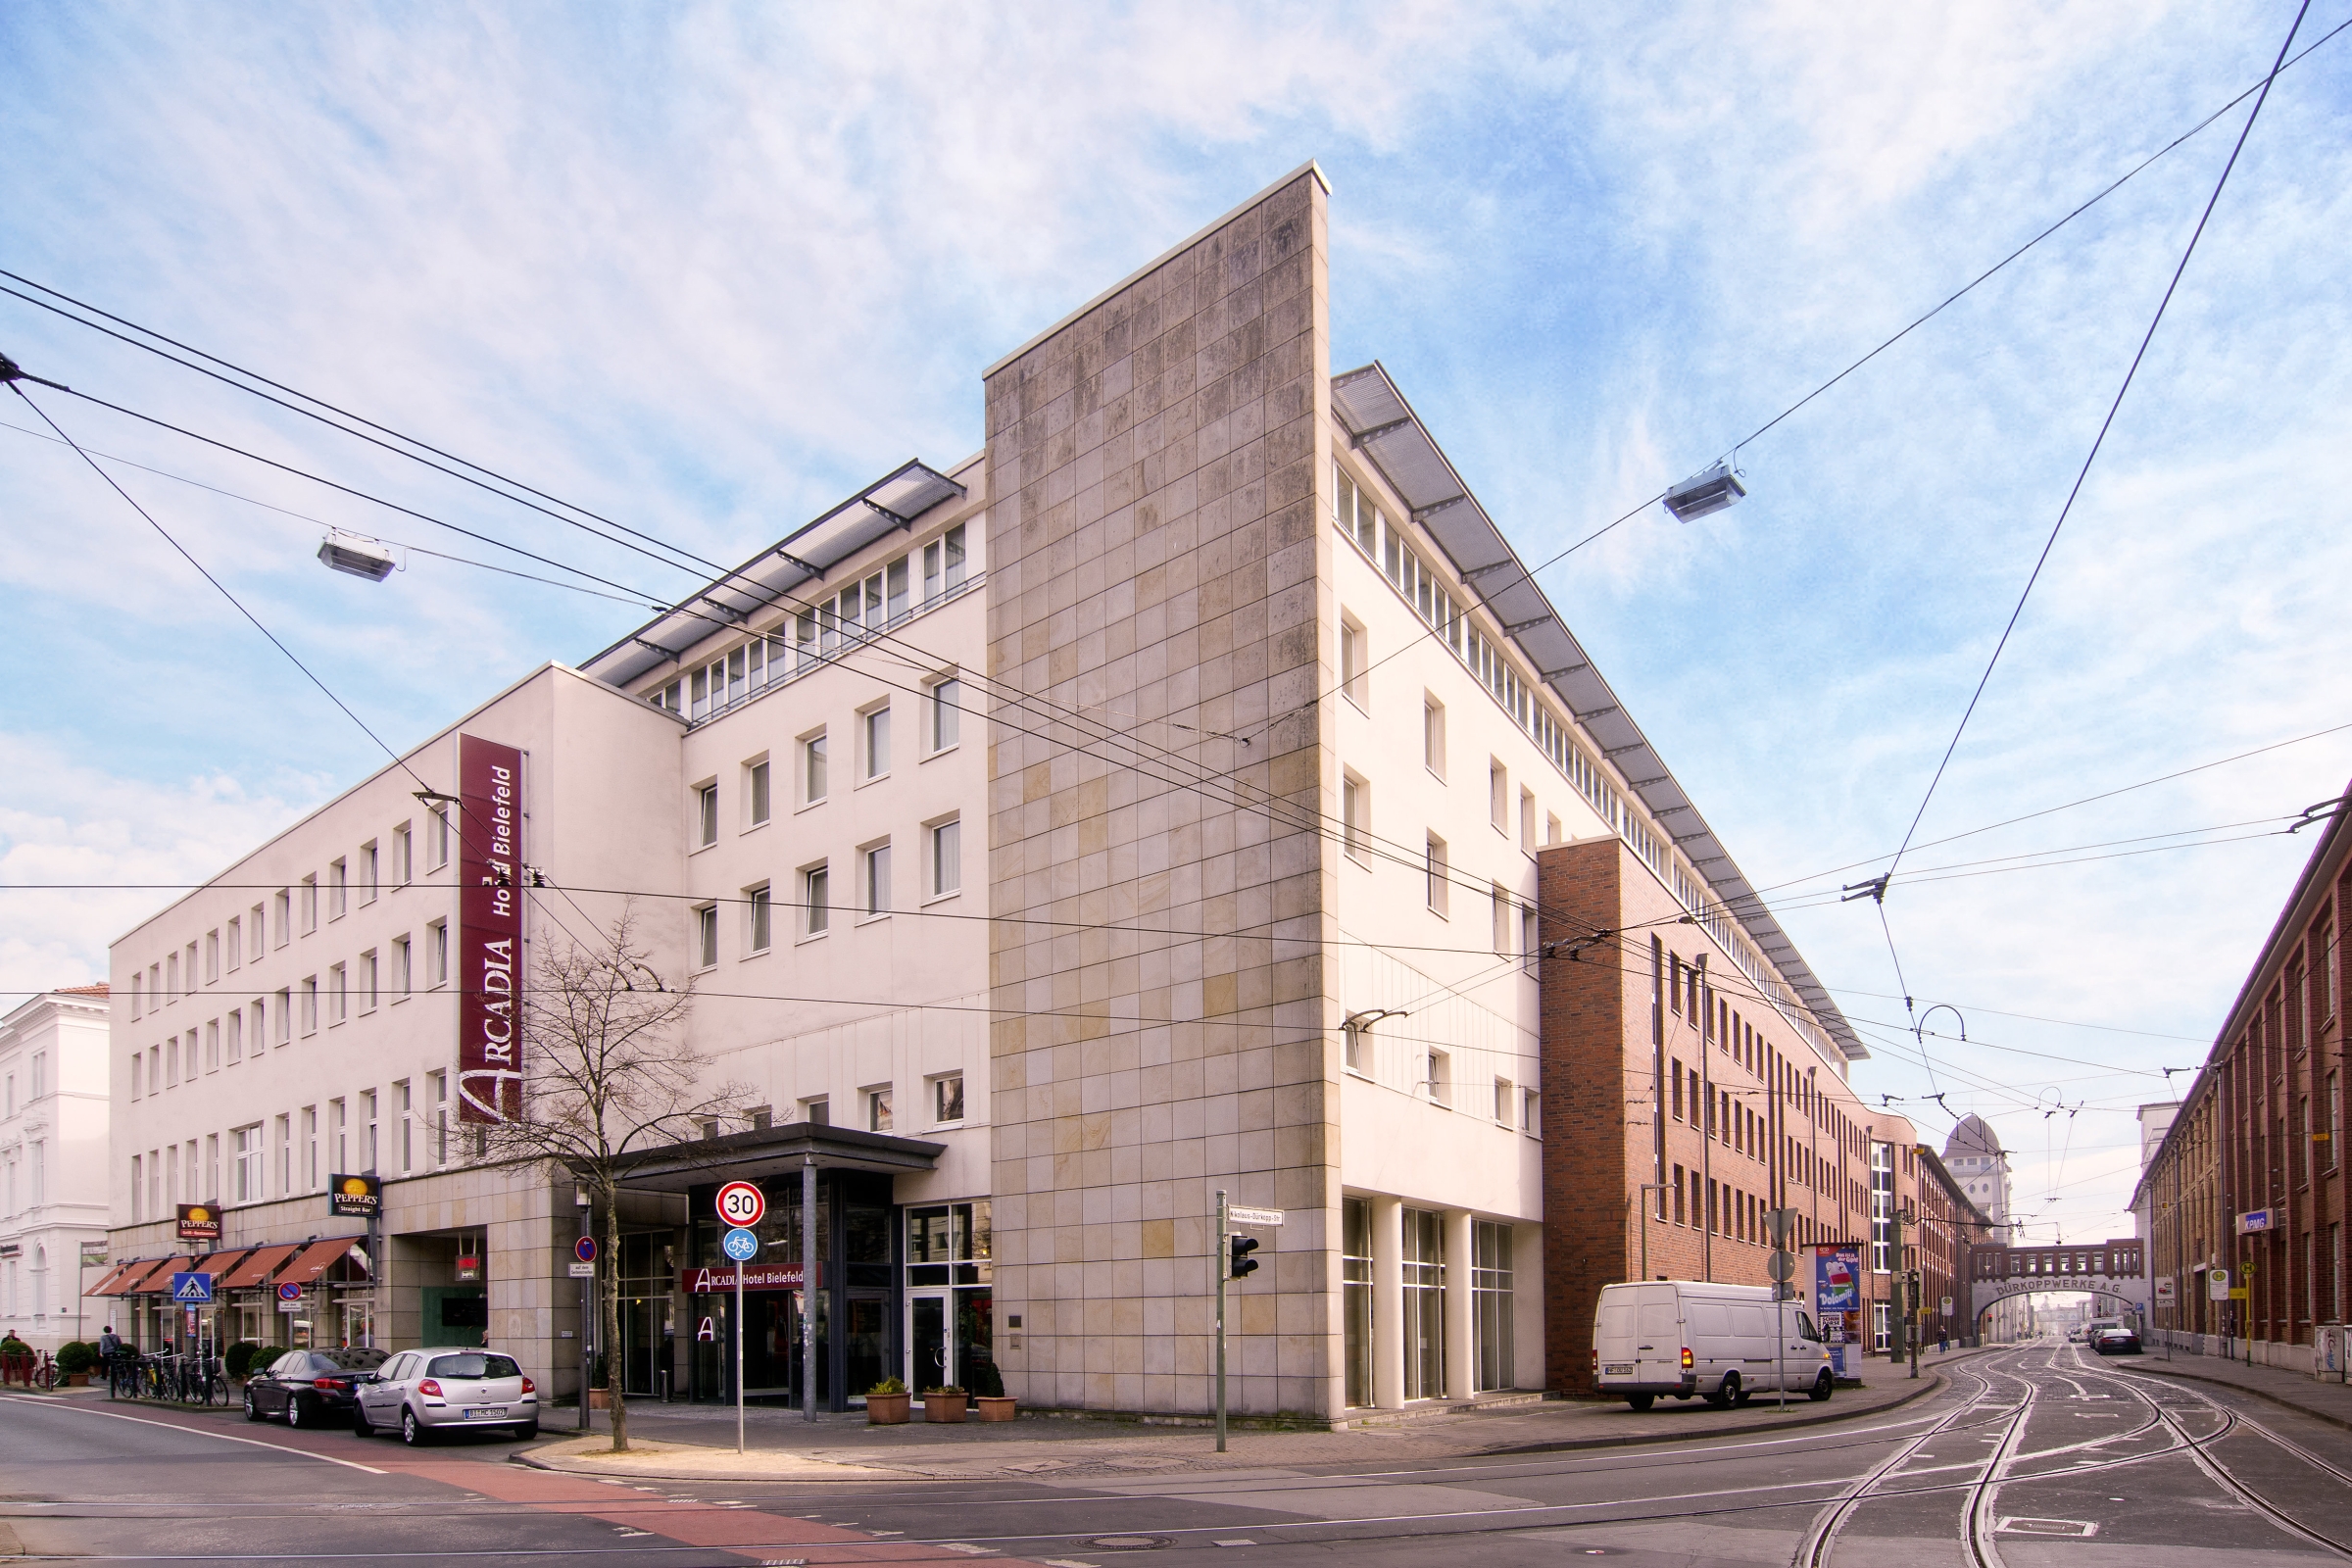 Hotel Arcadia - Bielefeld - Great prices at HOTEL INFO